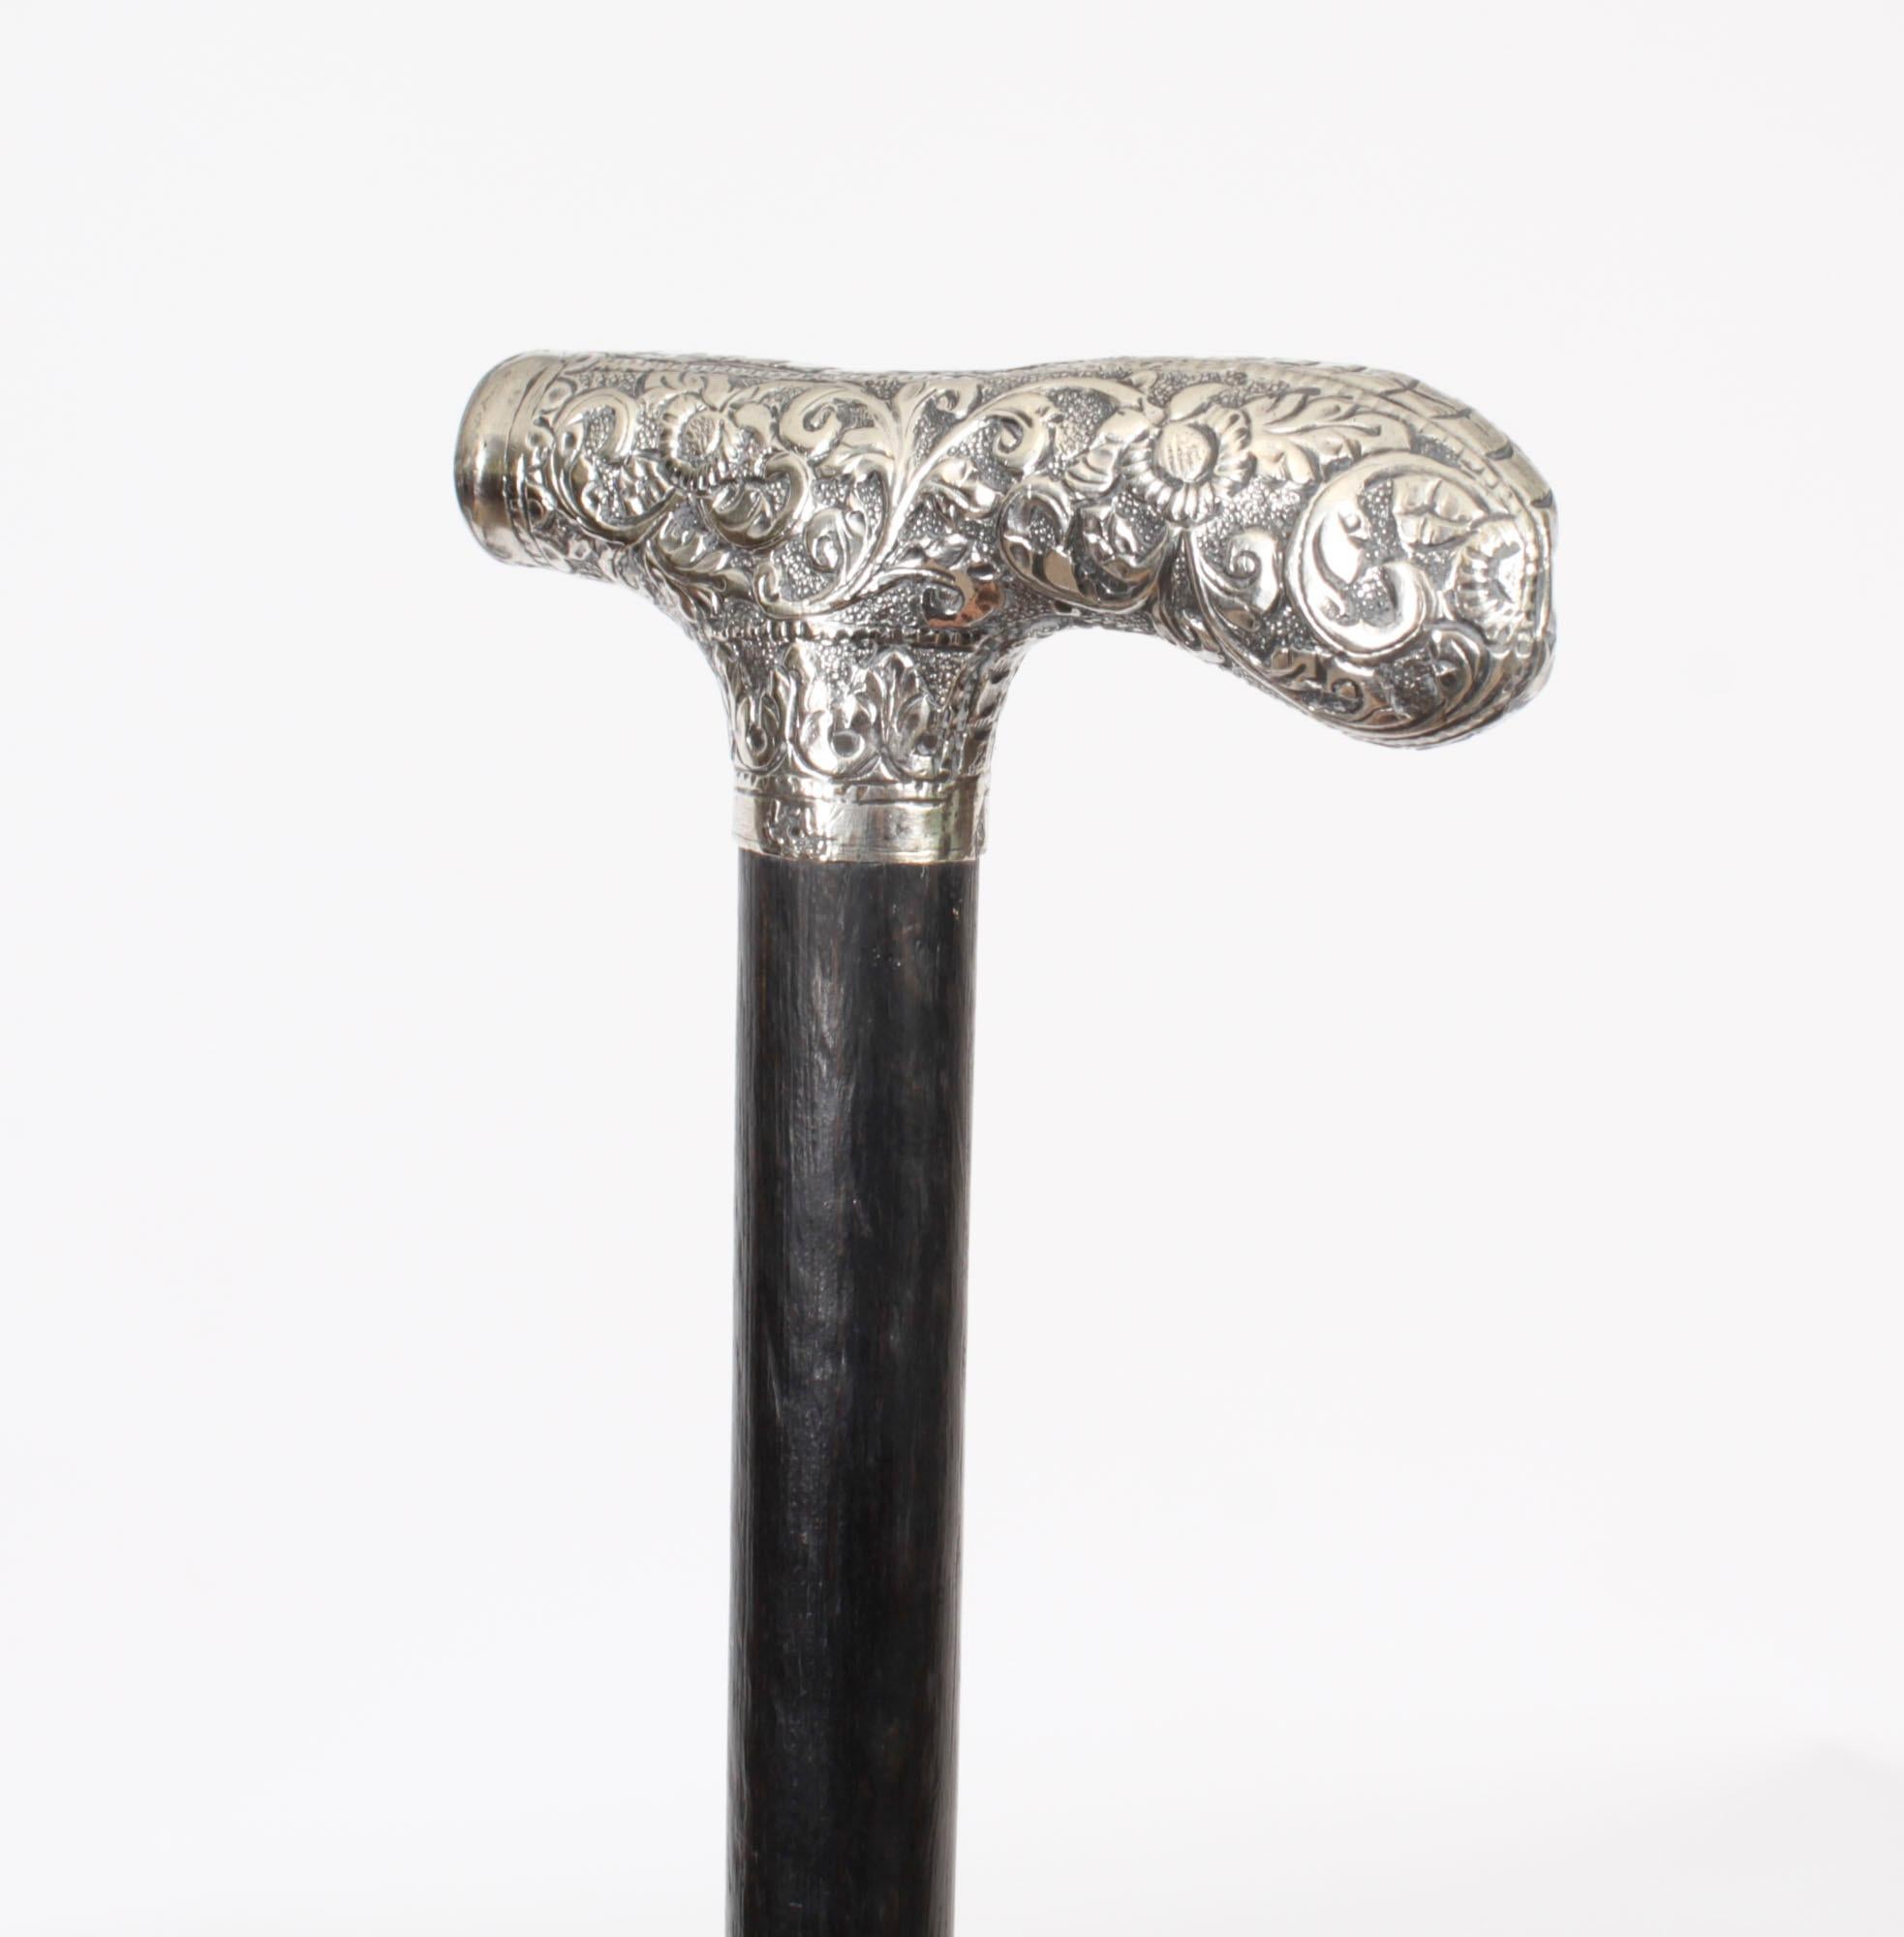 This is a beautiful antique sterling silver pommel walking stick circa 1880 in date

The striking stick features an ornate silver crutch handle having a profusely embossed floral design, on a gentle tapering ebonized shaft, it has its original brass